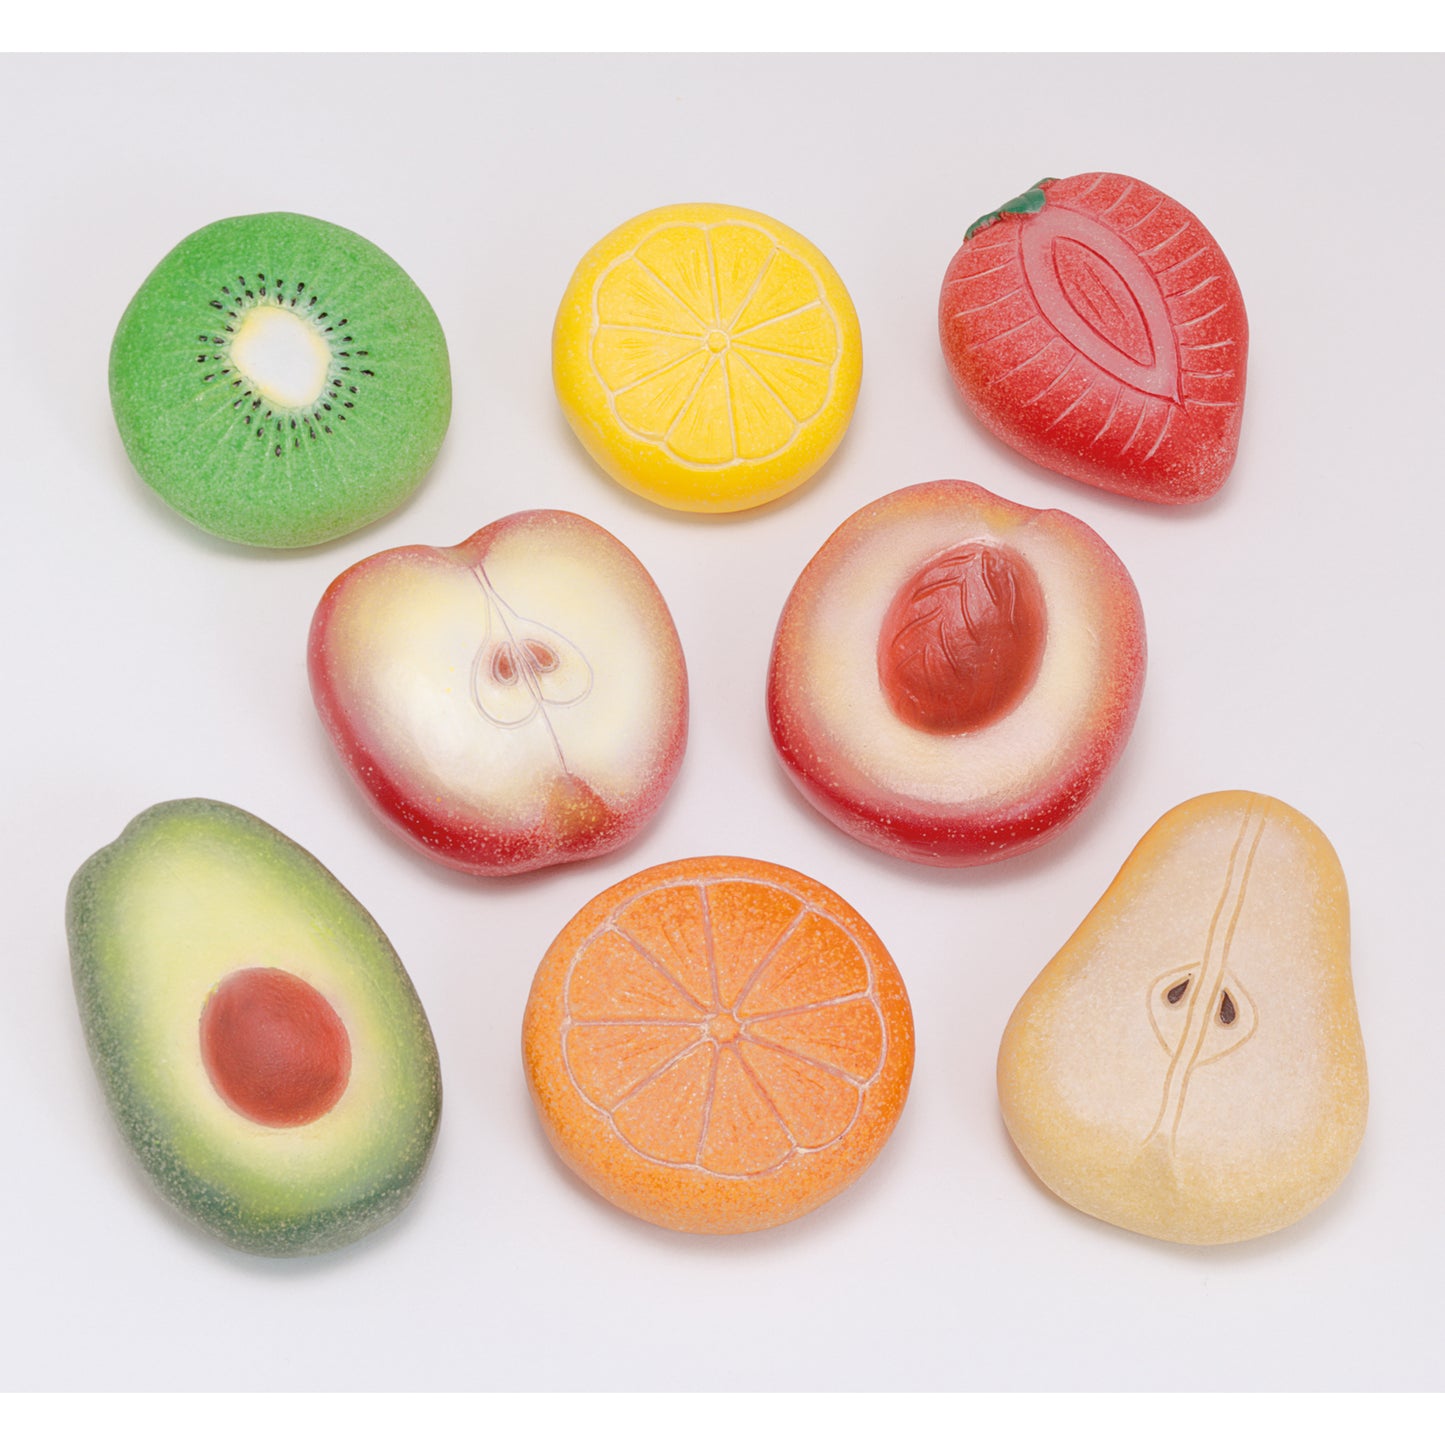 Yellow Door Fruit Sensory Play Stones, Set of 8 - Colorful Stone Fruit Collection